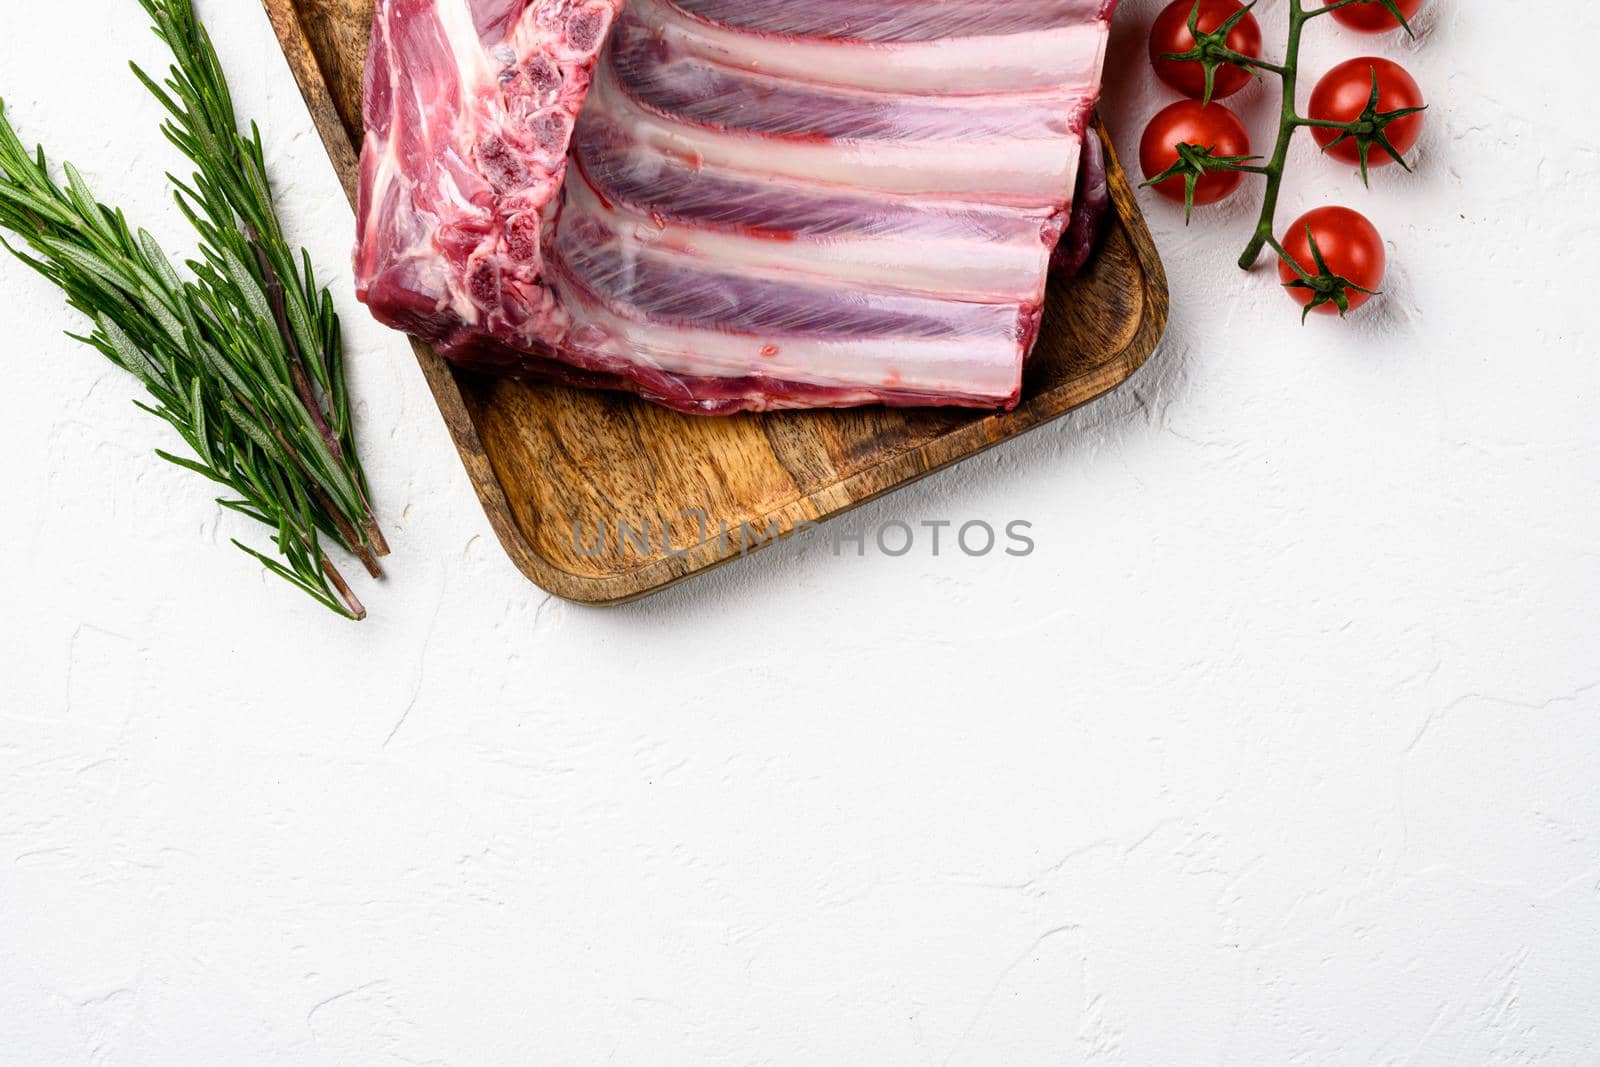 Raw meat rib rack, on white stone table background, top view flat lay, with copy space for text by Ilianesolenyi